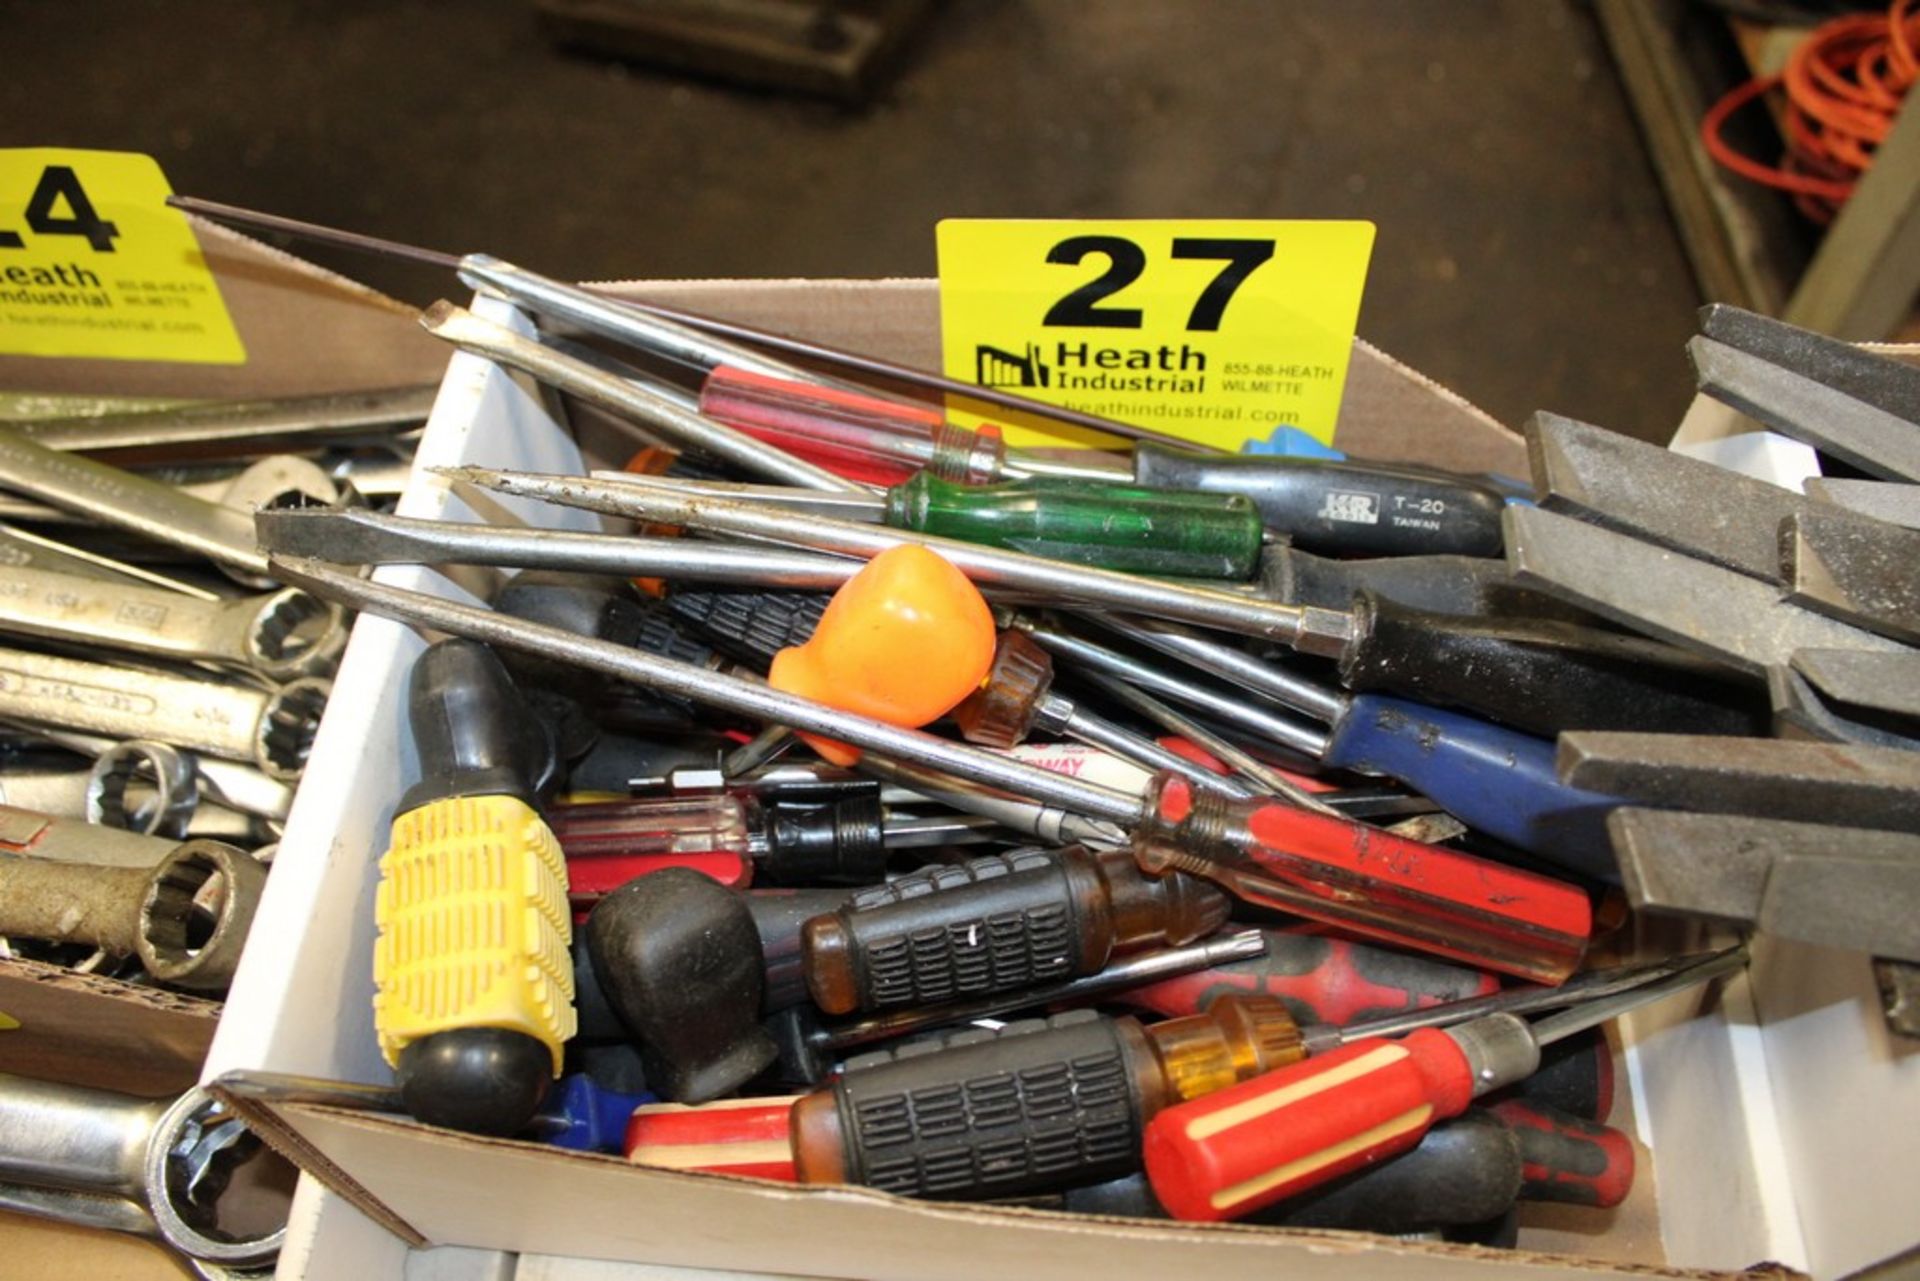 LARGE QTY OF SCREWDRIVERS IN BOX